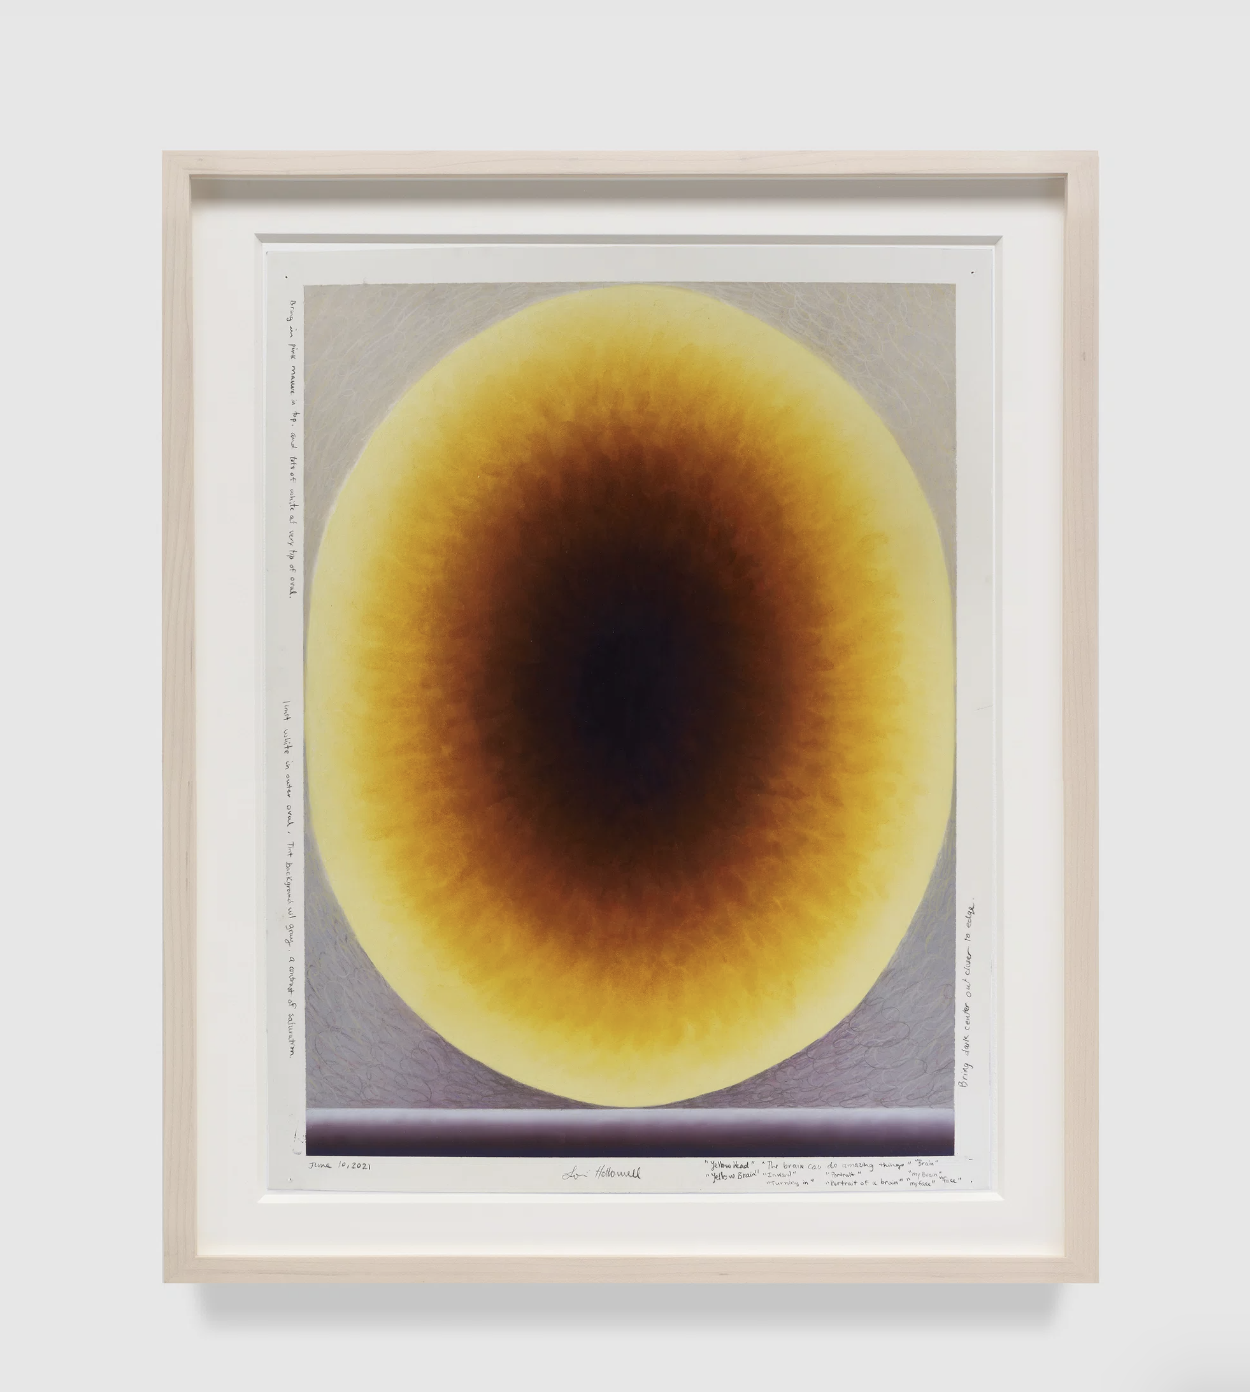  Loie Hollowell,  Yellow Brain , June 10, 2021, soft pastel and graphite on paper, paper, 26" × 20" (66 cm × 50.8 cm) framed, 28-5/8" × 22-5/8" (72.7 cm × 57.5 cm) 